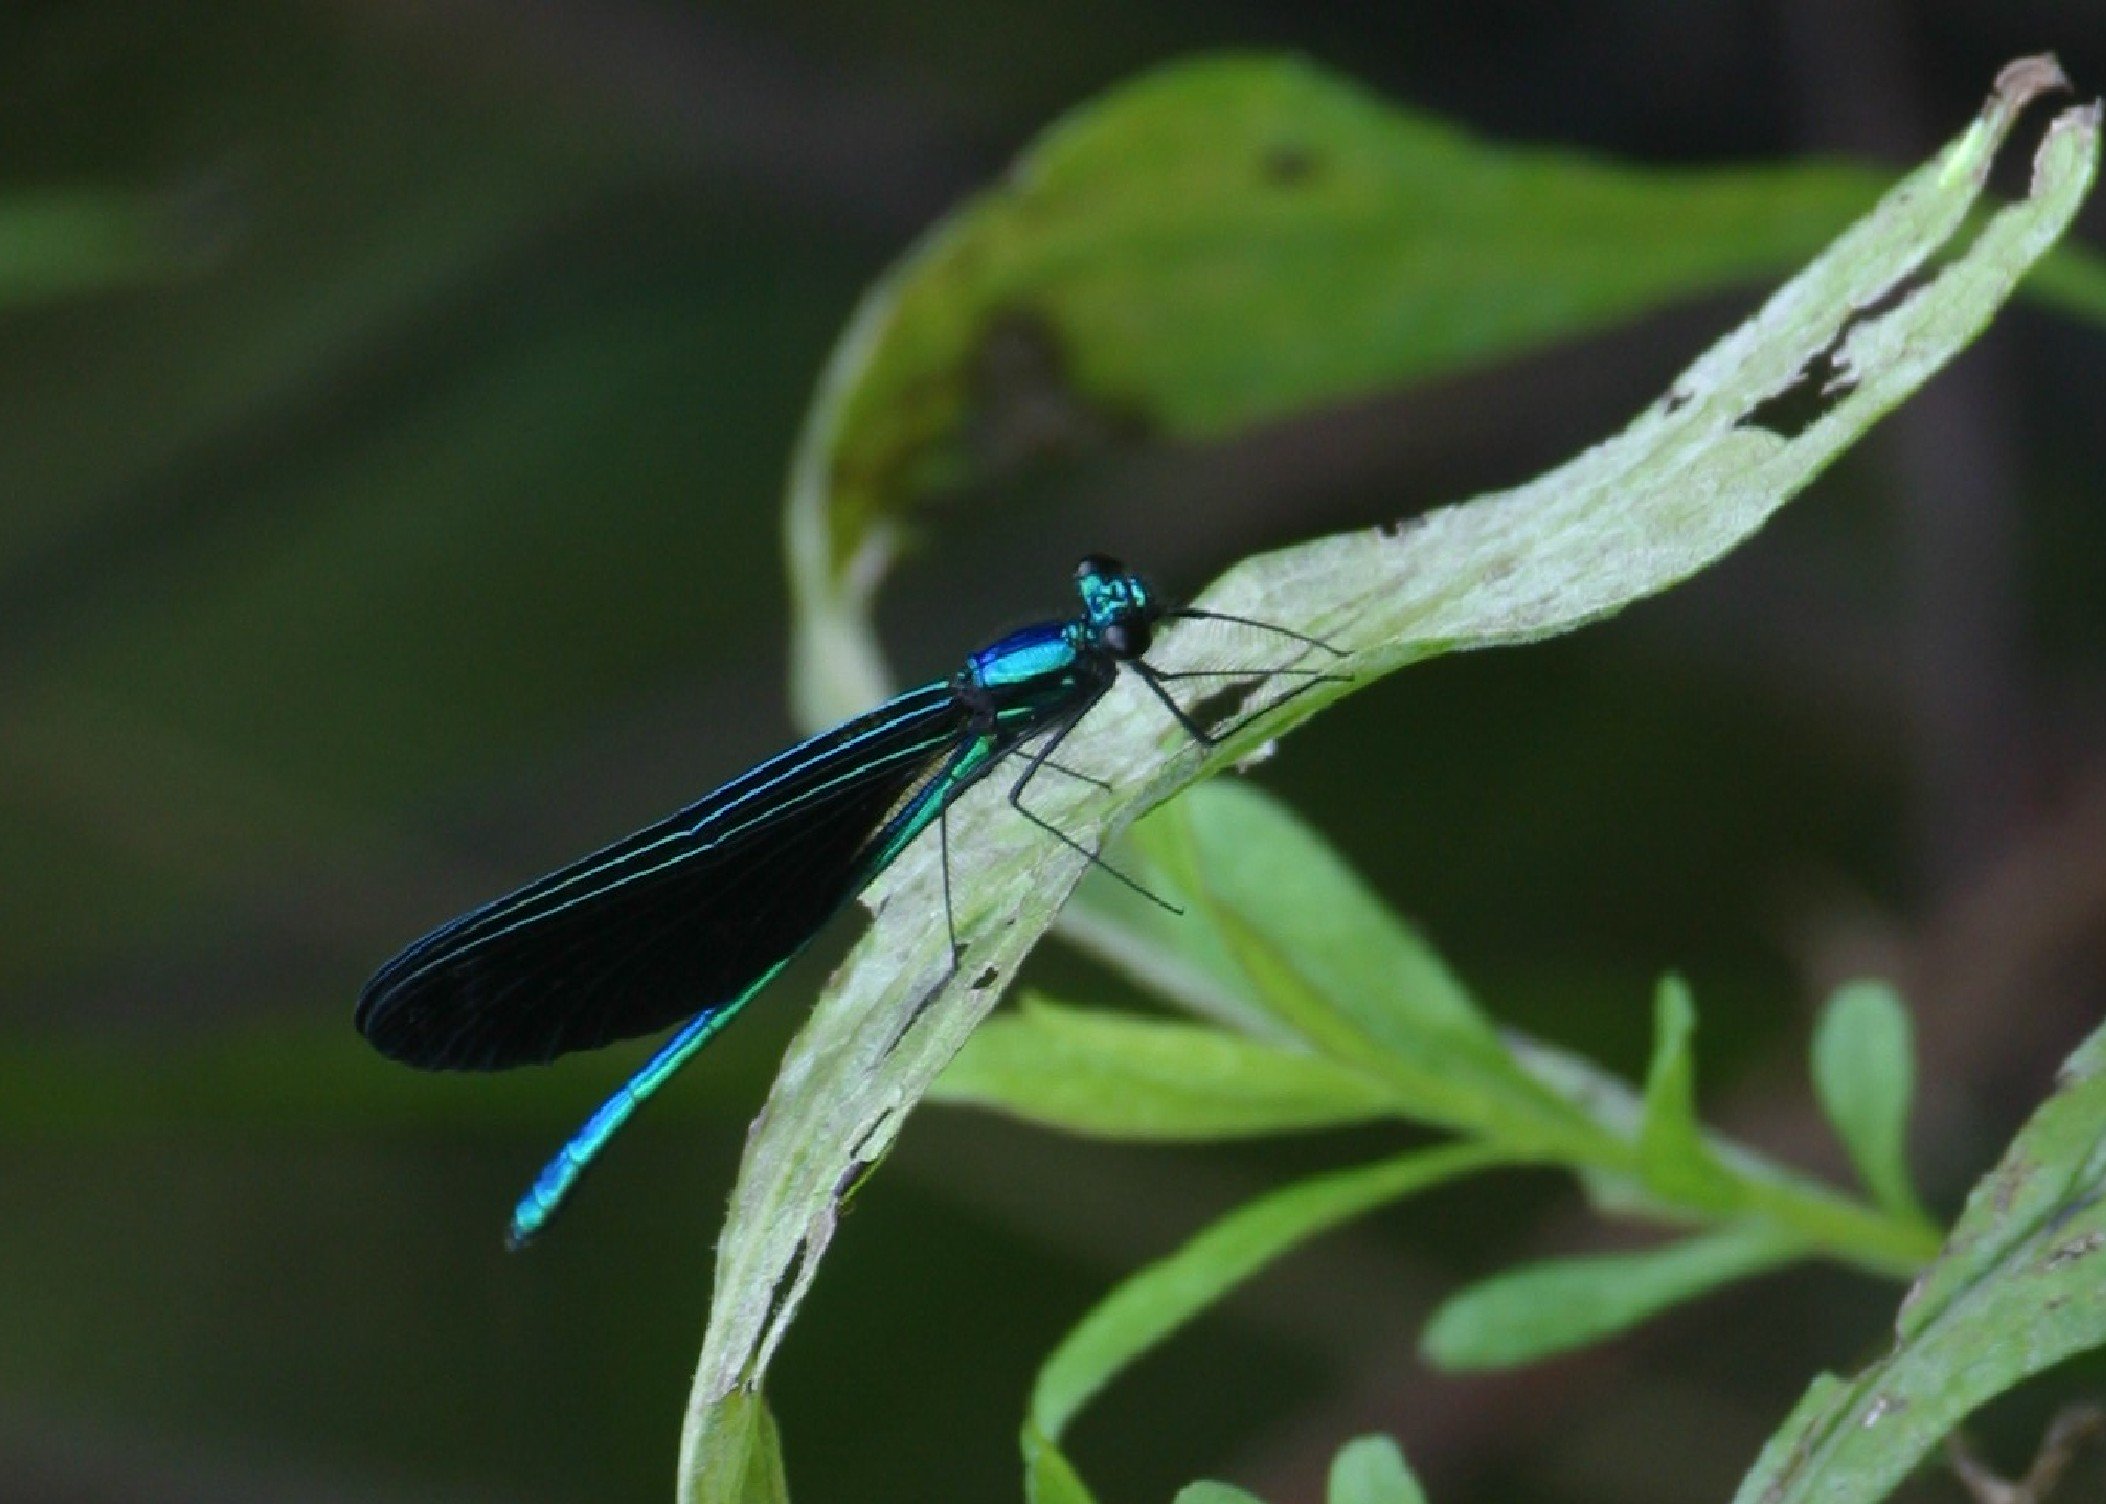 An iridescent green and blue insects sits on a leaf.